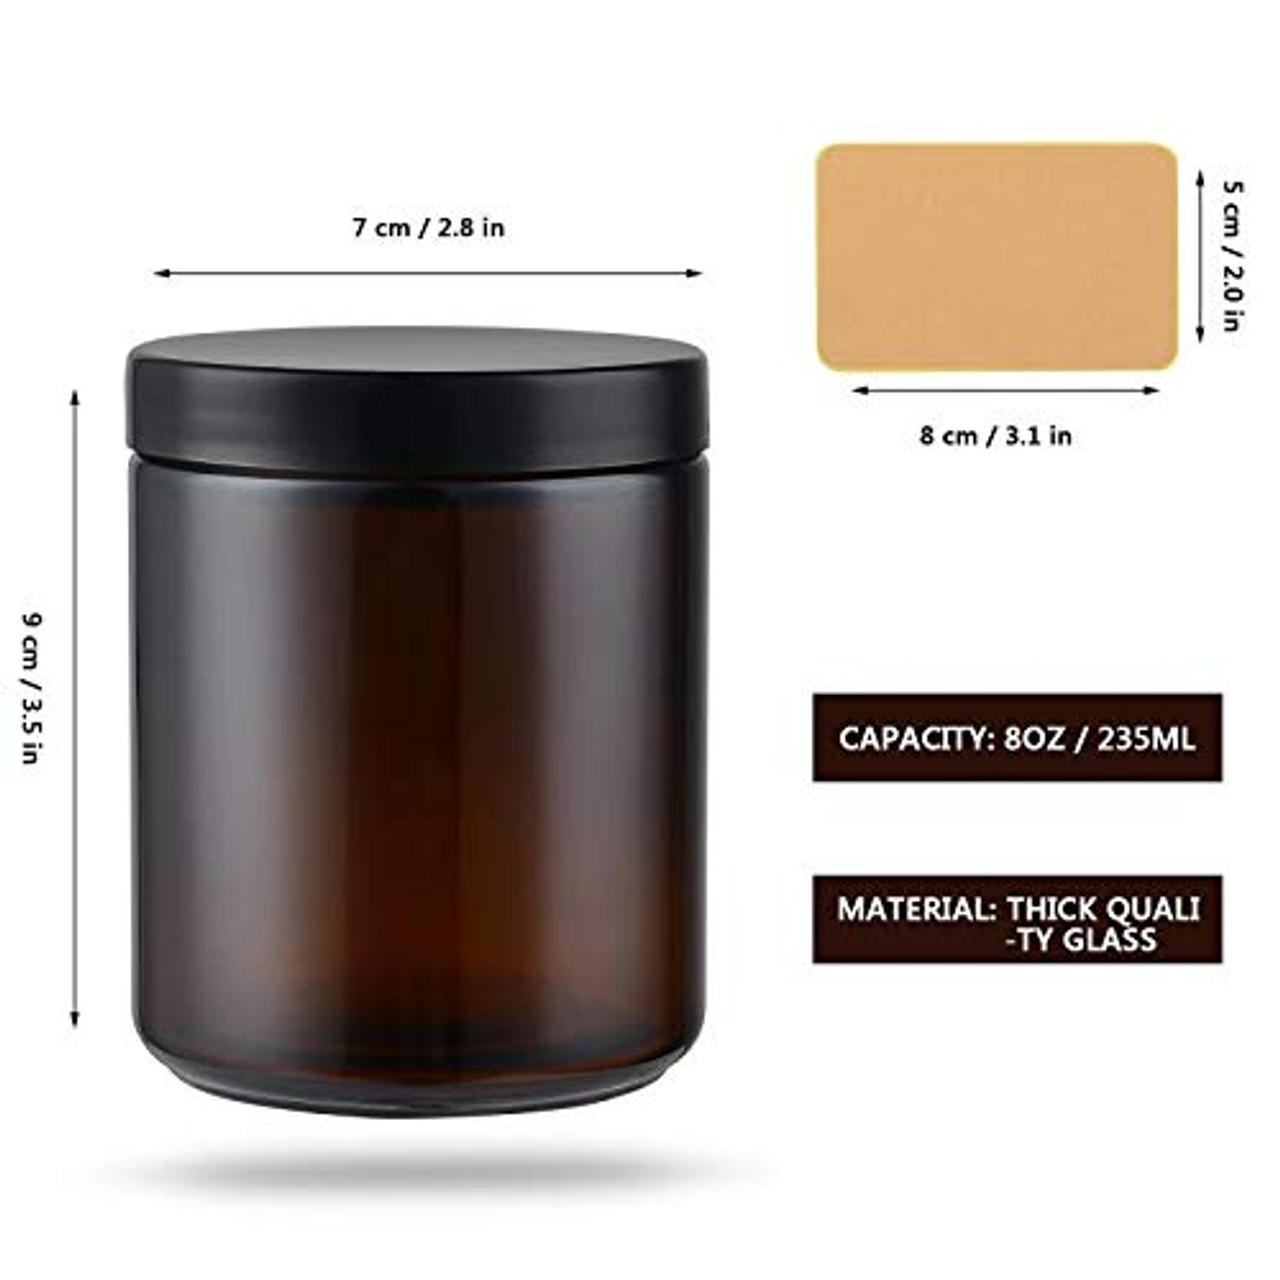 4oz Amber Glass Jar With Insulated Black Plastic Lid for Creams, Spice,  Honey, Skincare and Essential Oils. Also, Great for Candle Making 